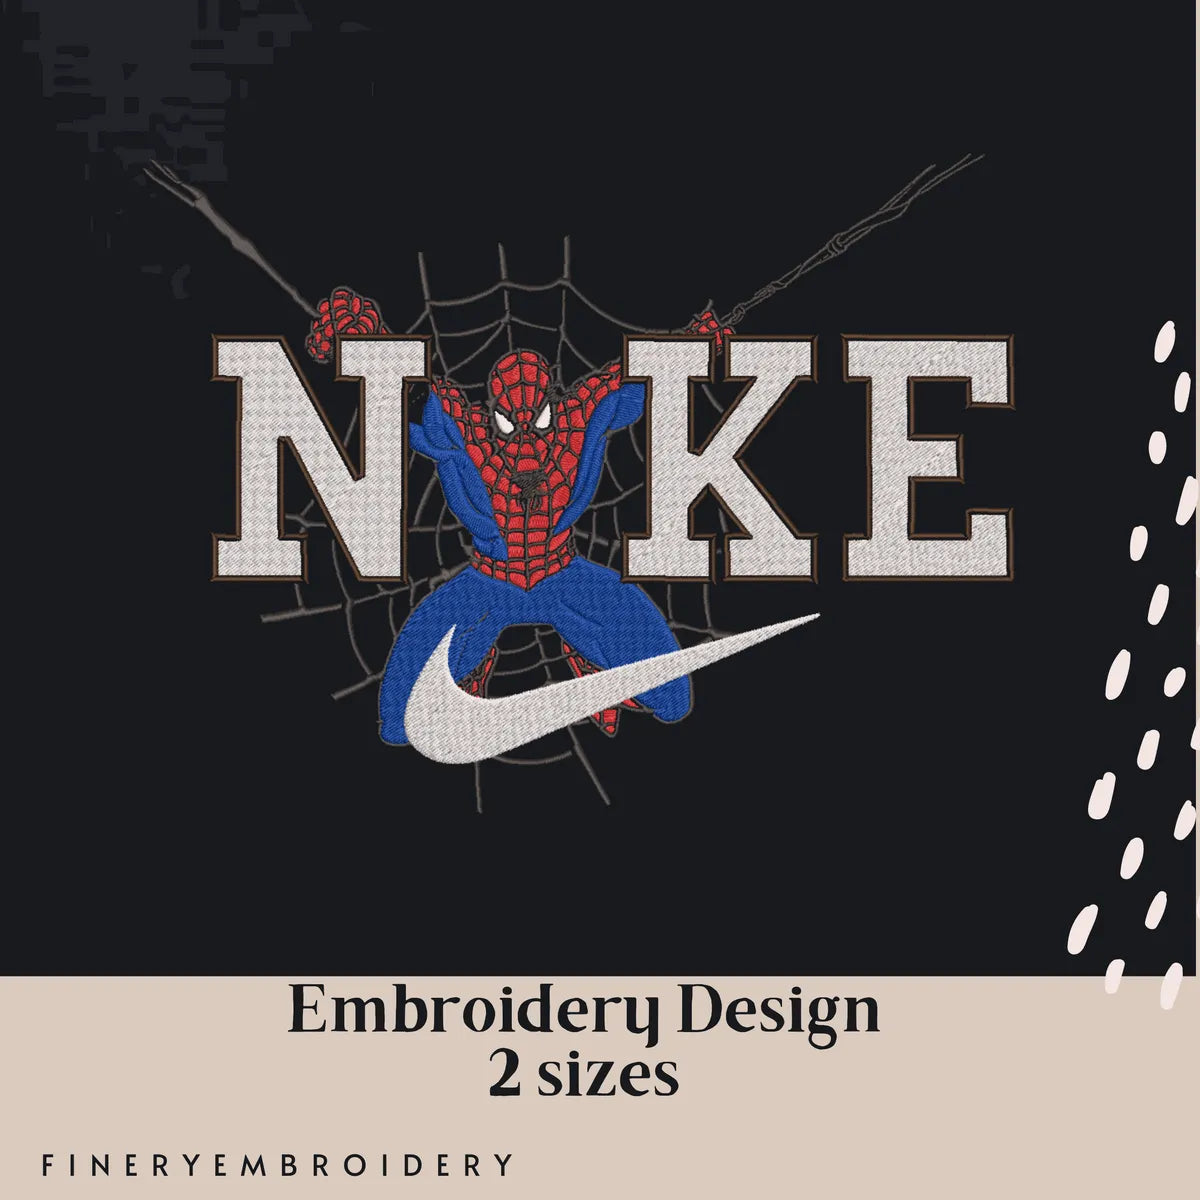 Nike and Spiderman 8 - Embroidery Design FineryEmbroidery